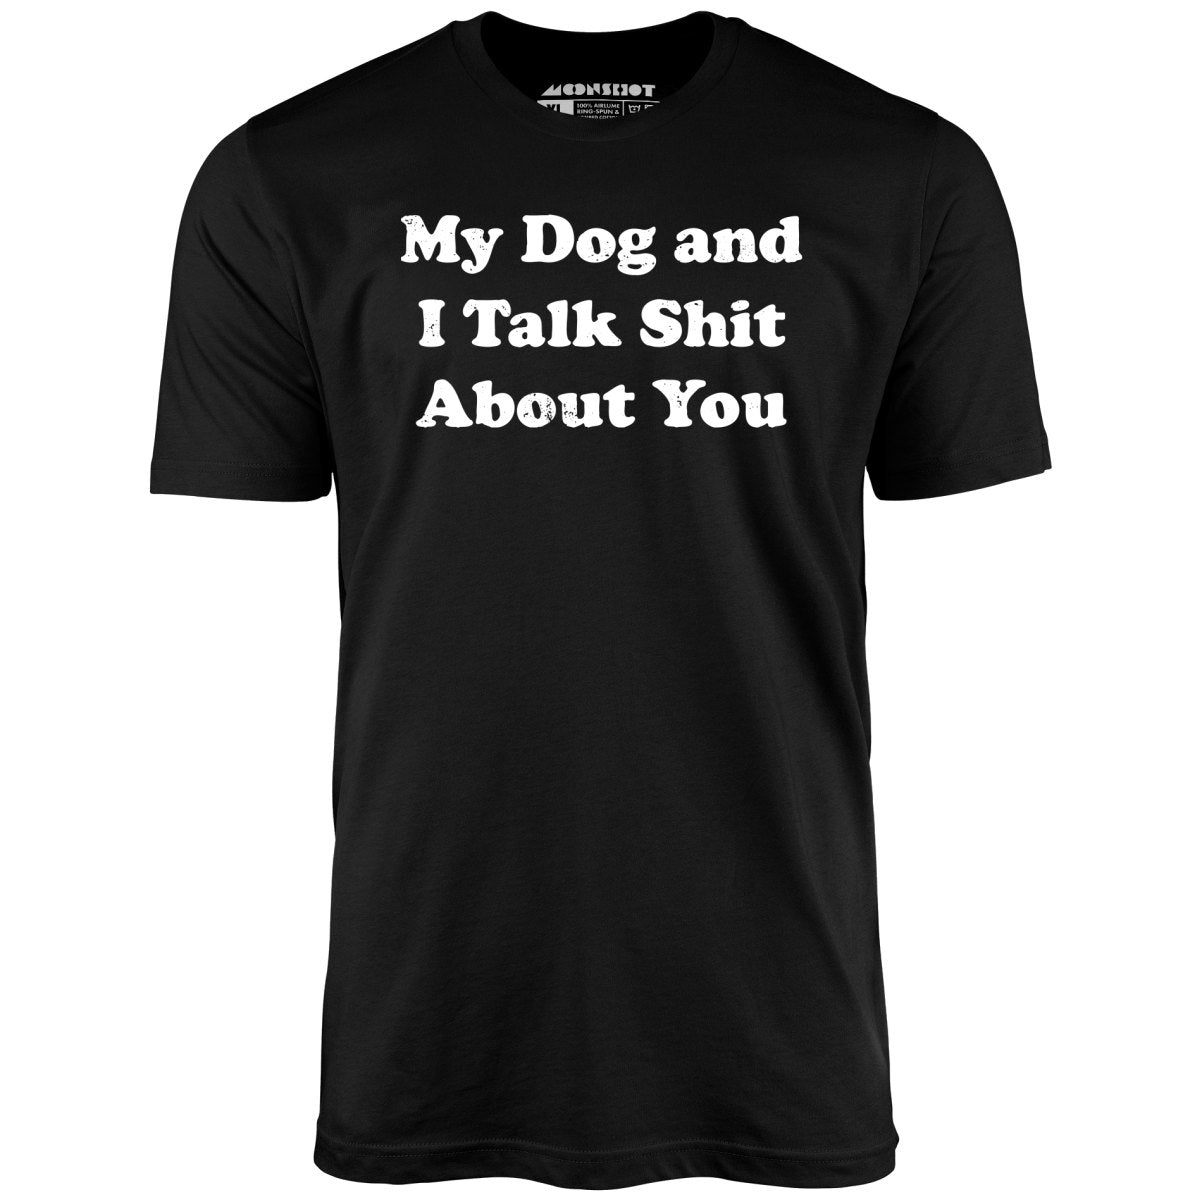 My Dog and I Talk Shit About You - Unisex T-Shirt